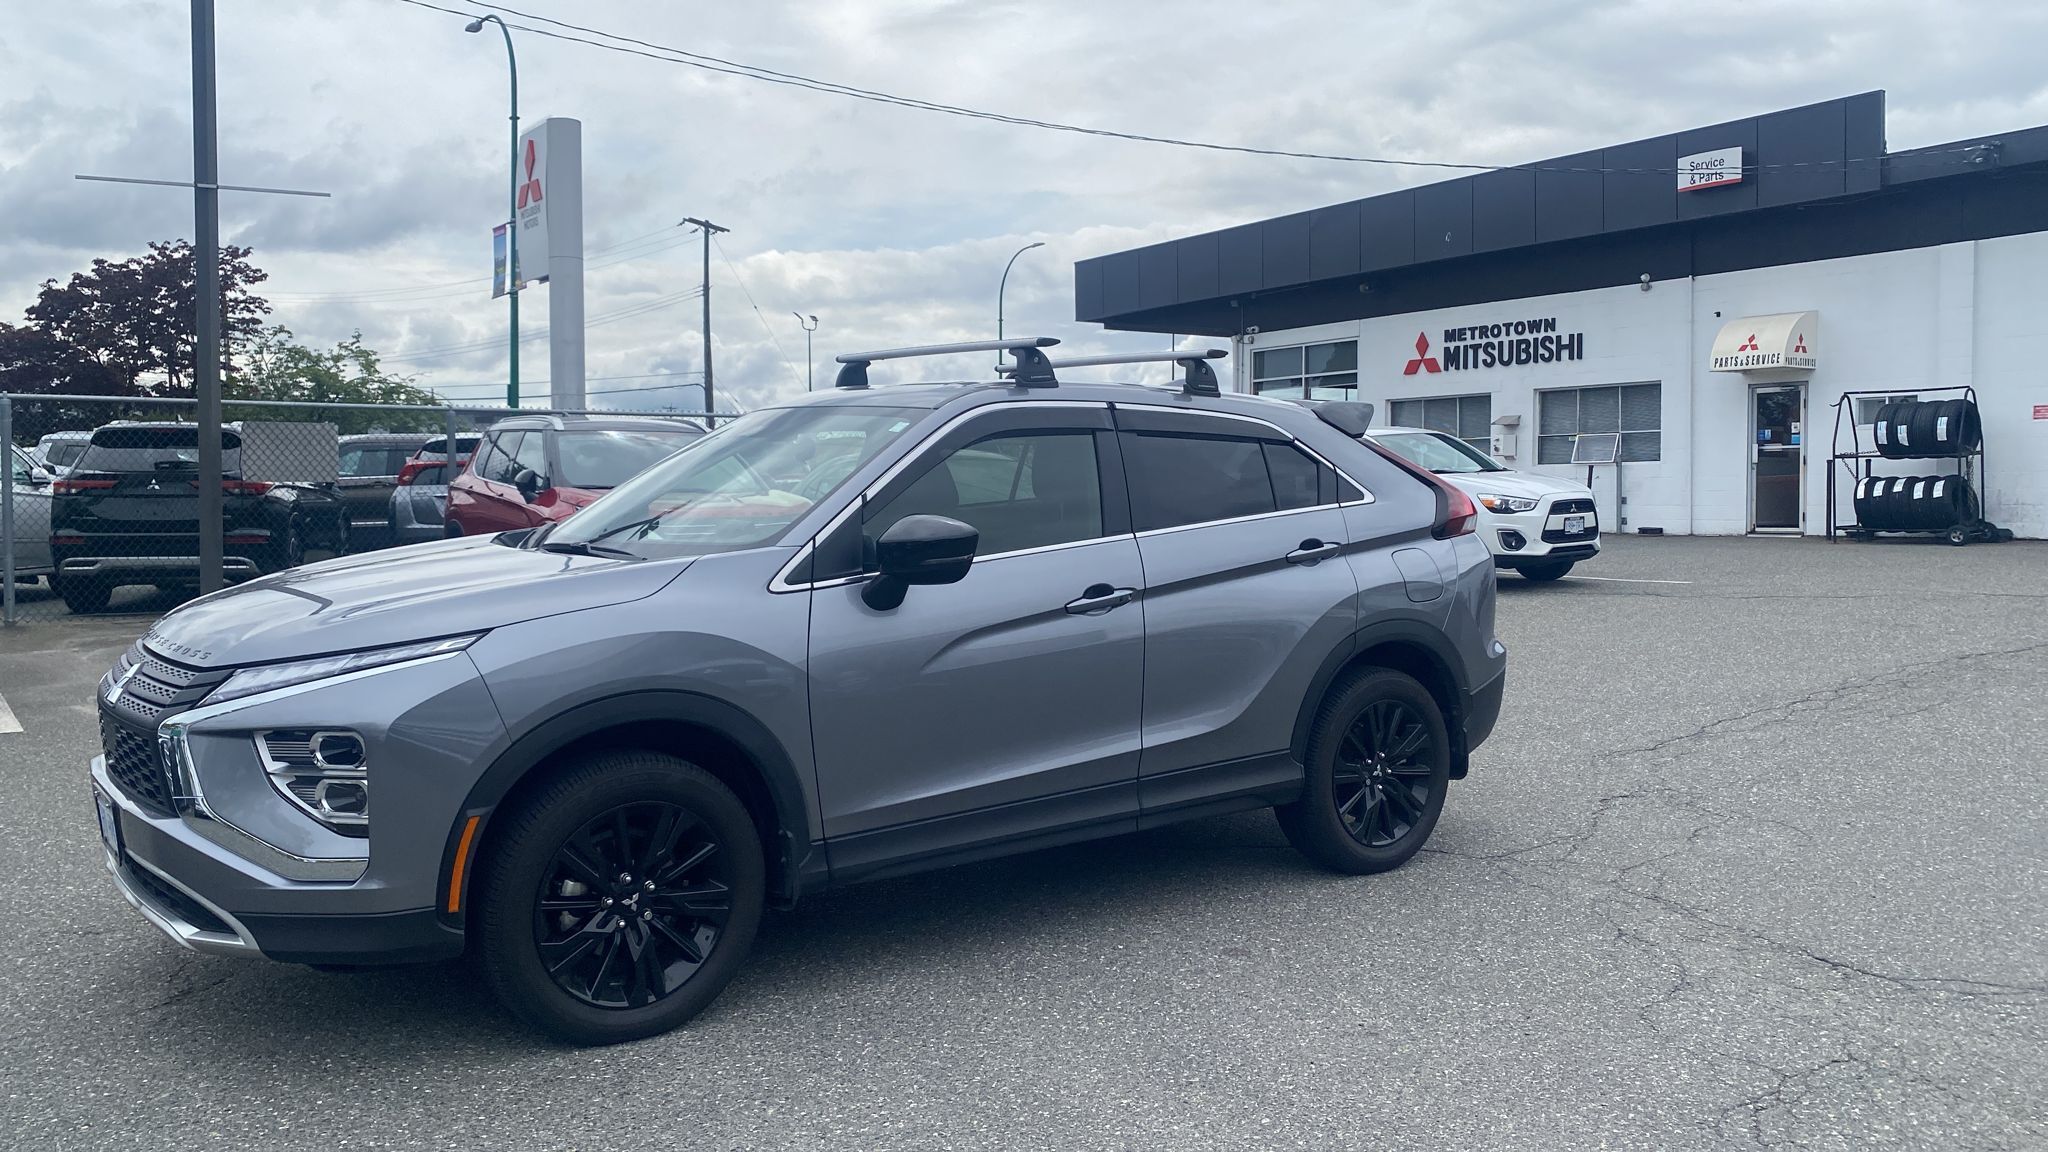 2023 Mitsubishi Eclipse Cross Carbon Edition S-AWC - Manager Demo - 0% Available